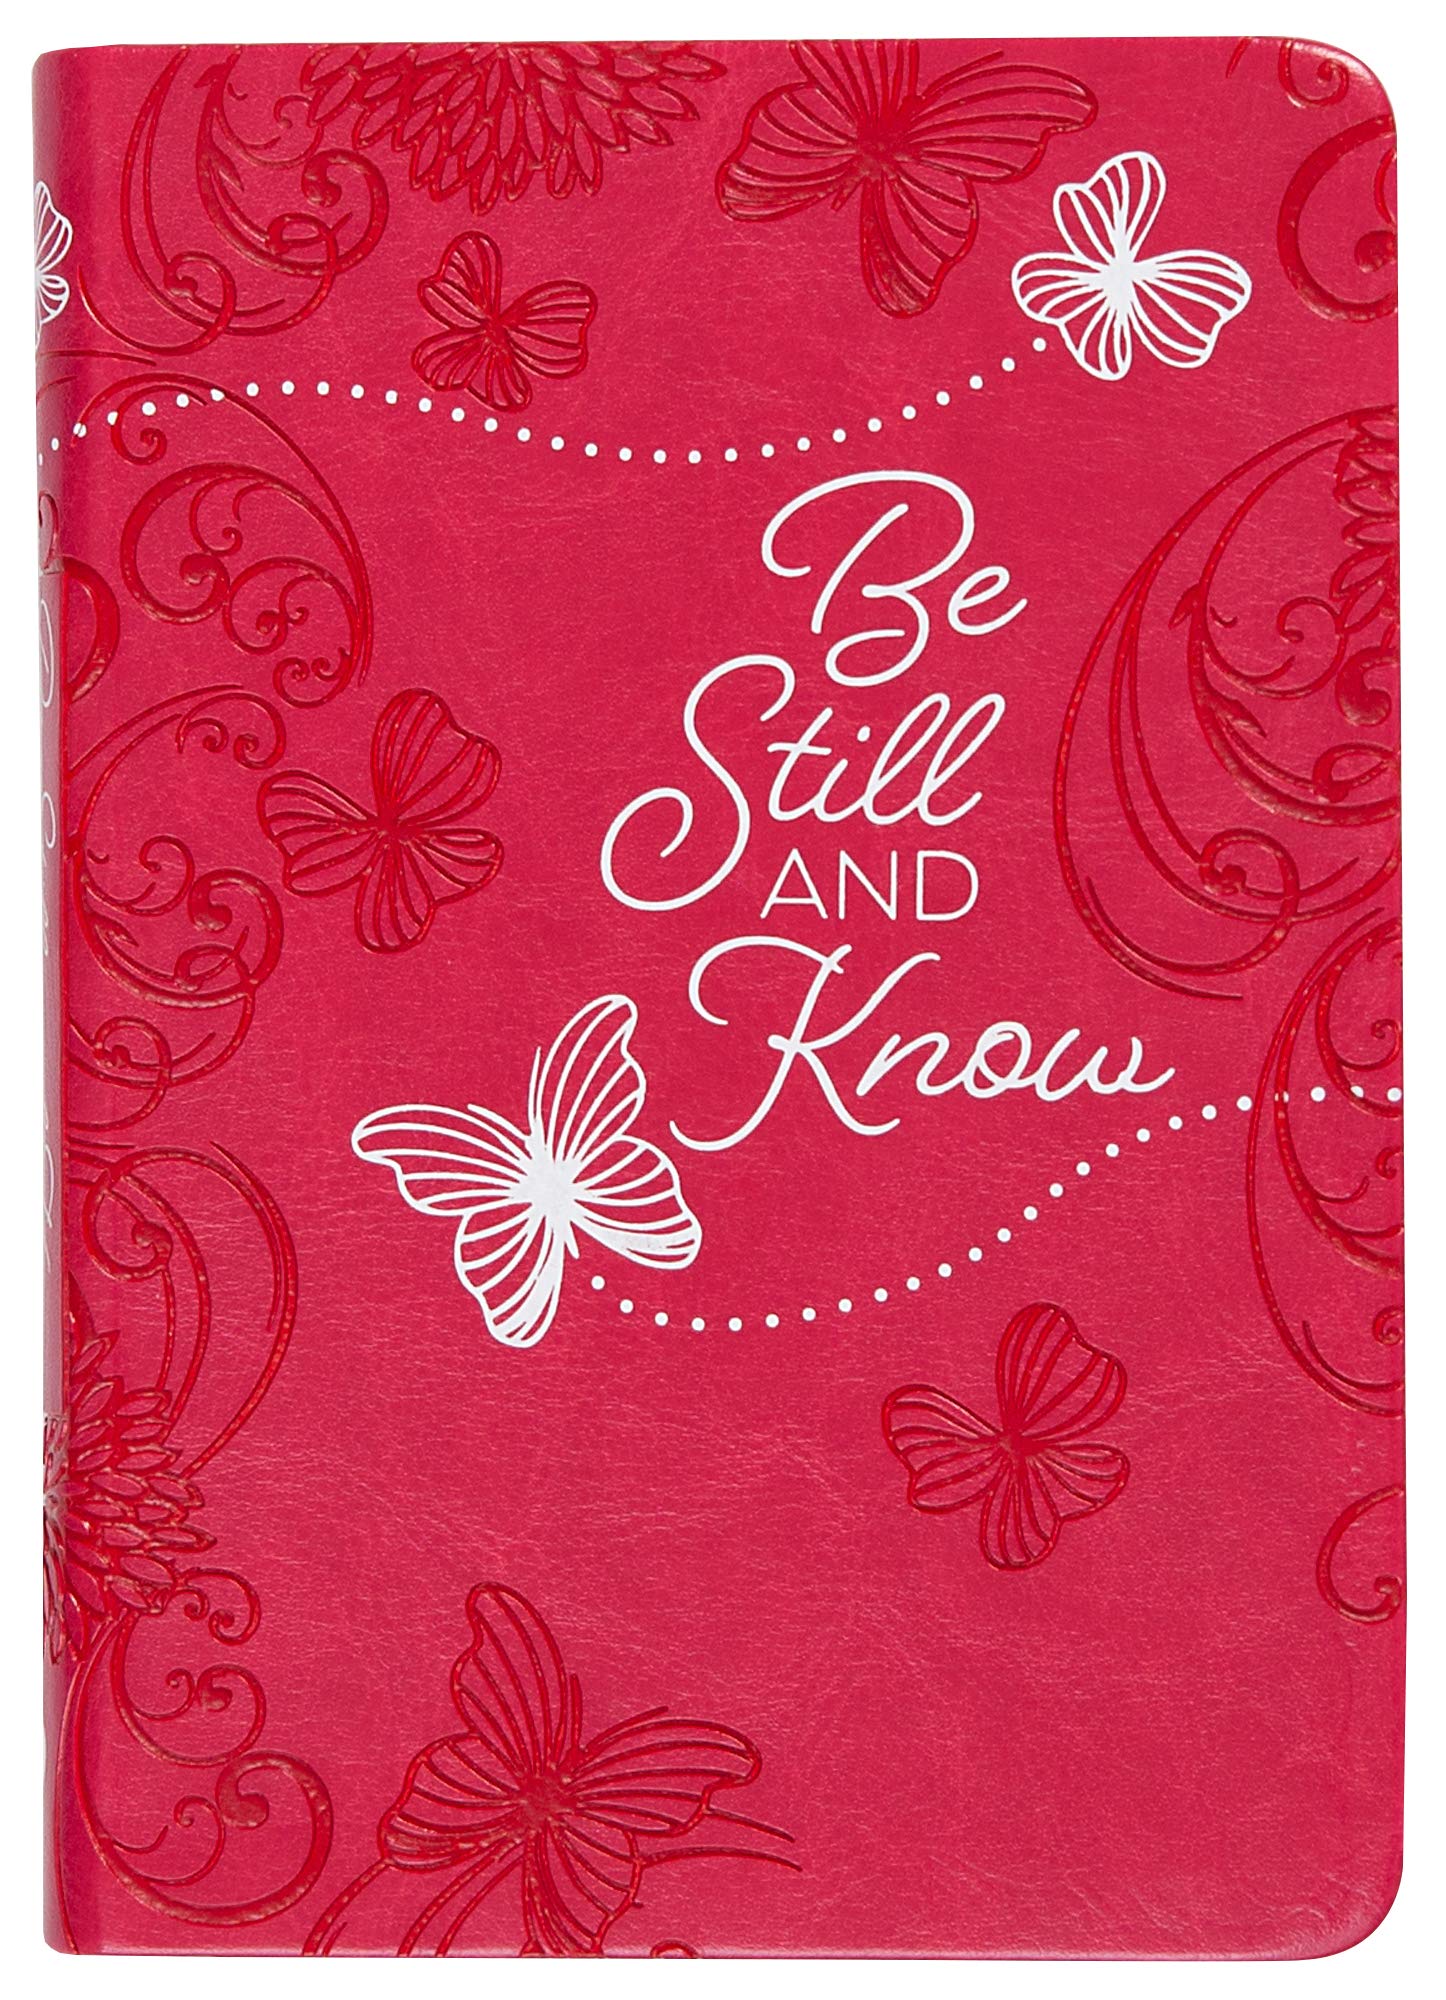 Be Still and Know: 365 Daily Devotions by Broadstreet Publishing Group LLC